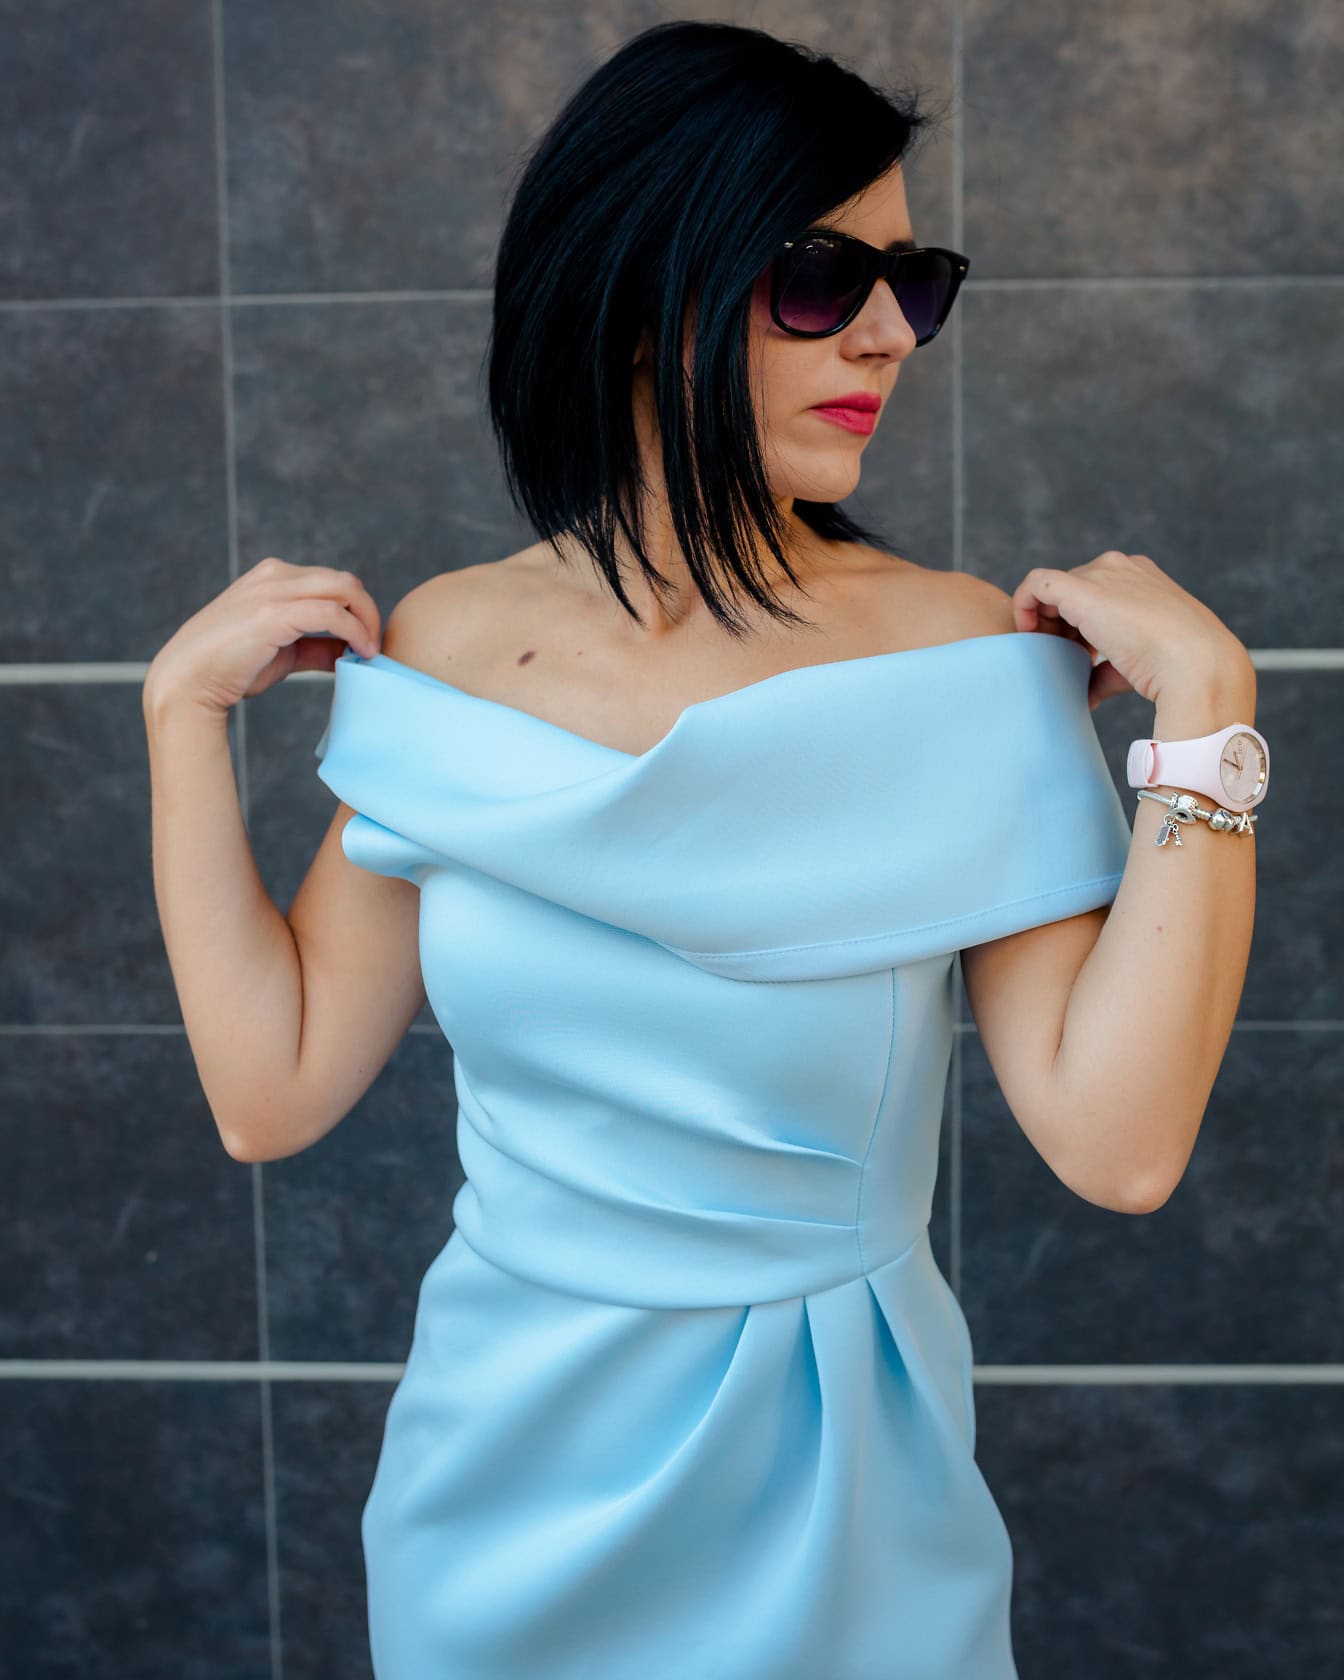 A woman wears sunglasses and poses with her hands on her shoulders while wearing an elegant blue dress